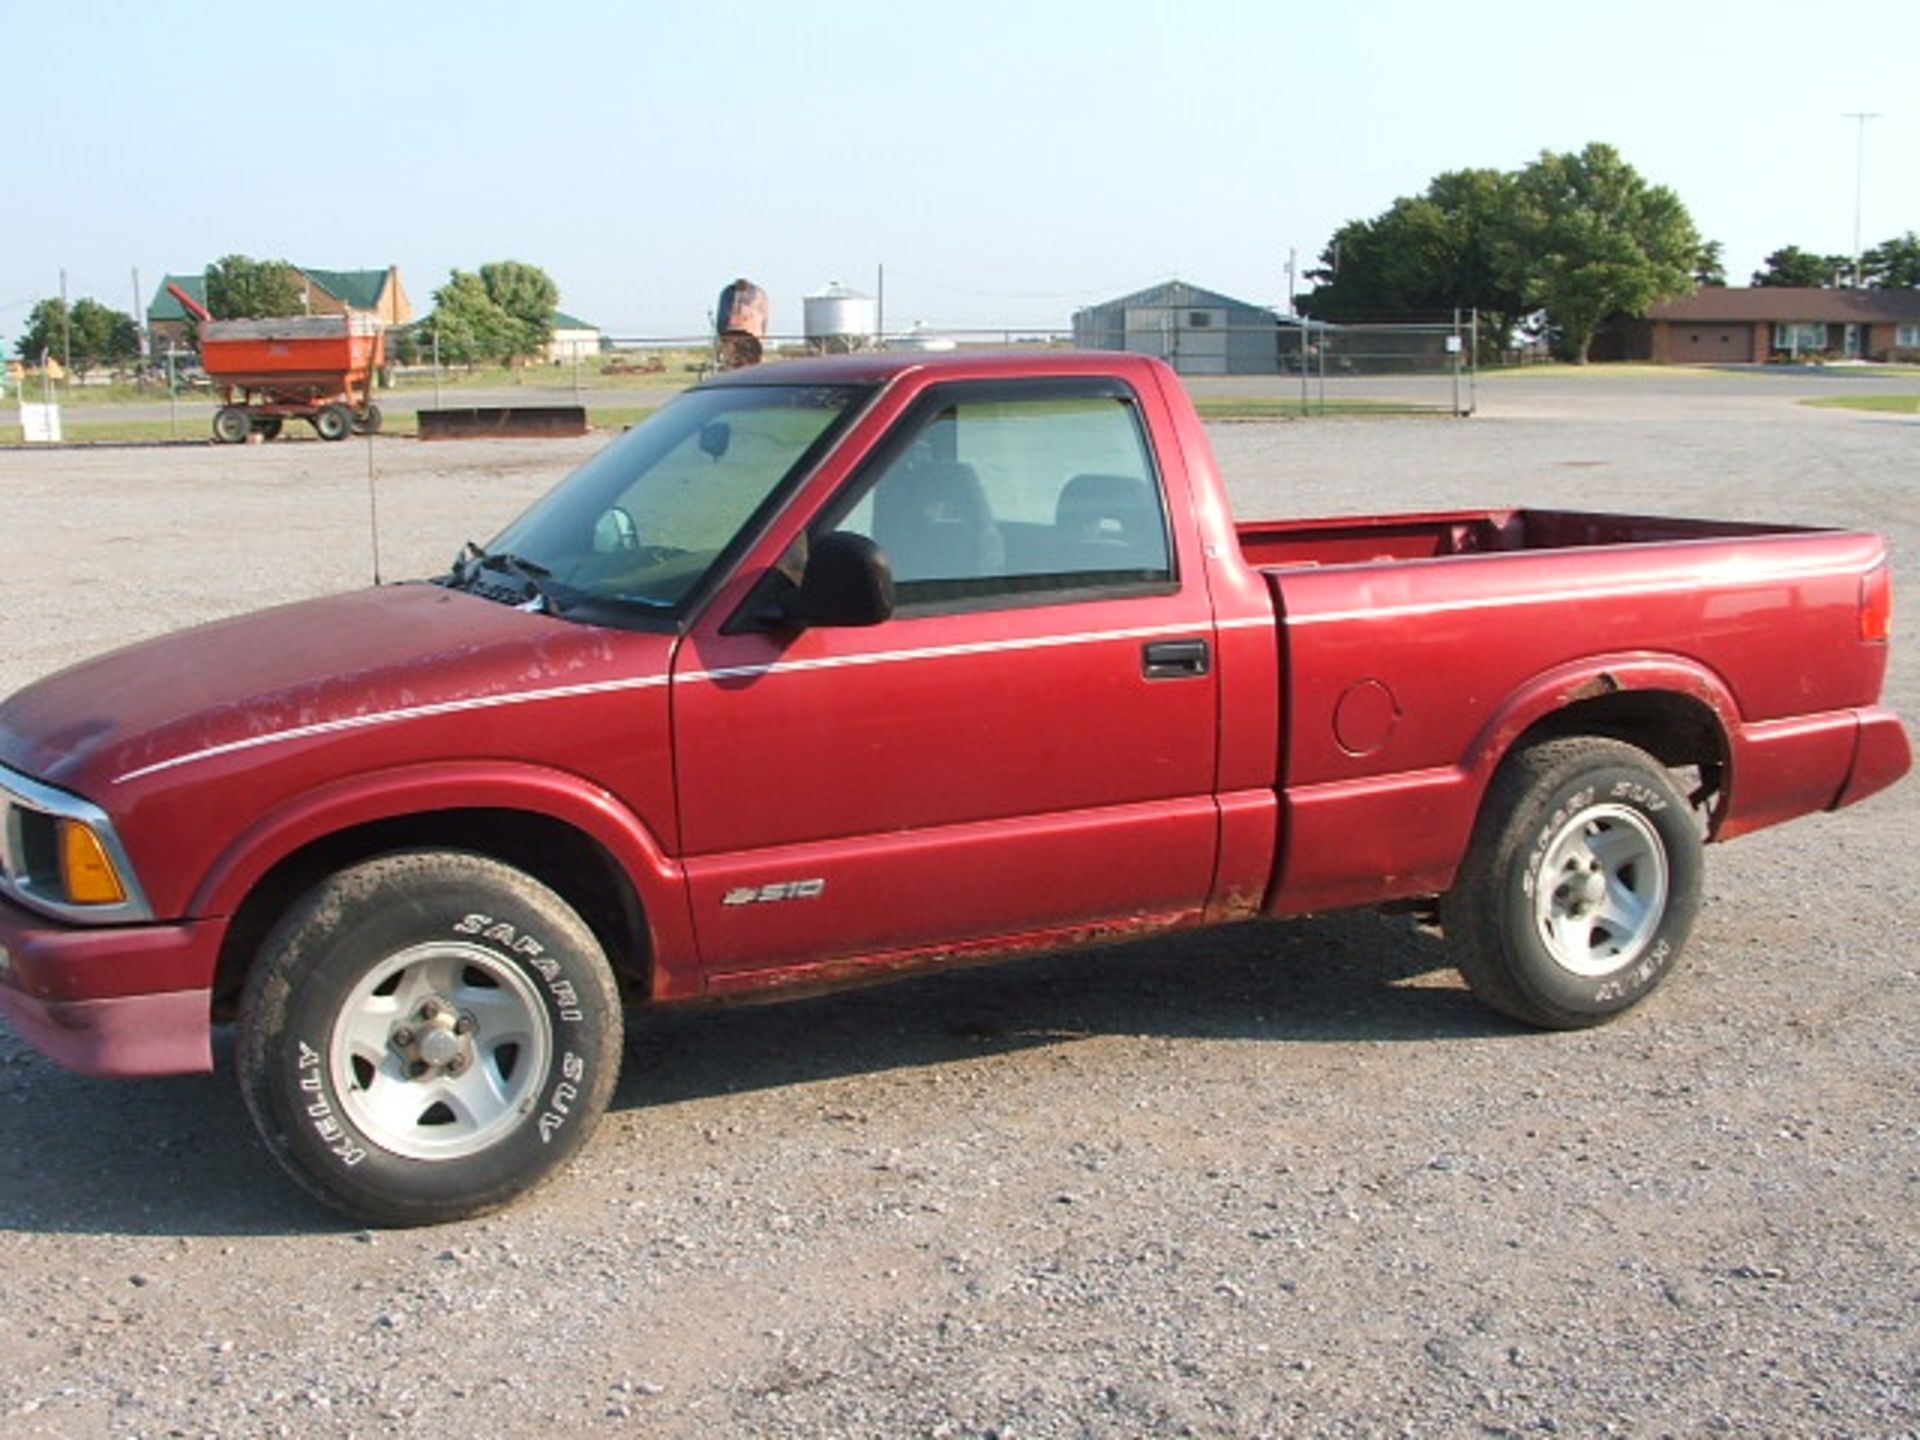 Lot 836 1995 Chevy S10 4Cyl Automatic - As-Is